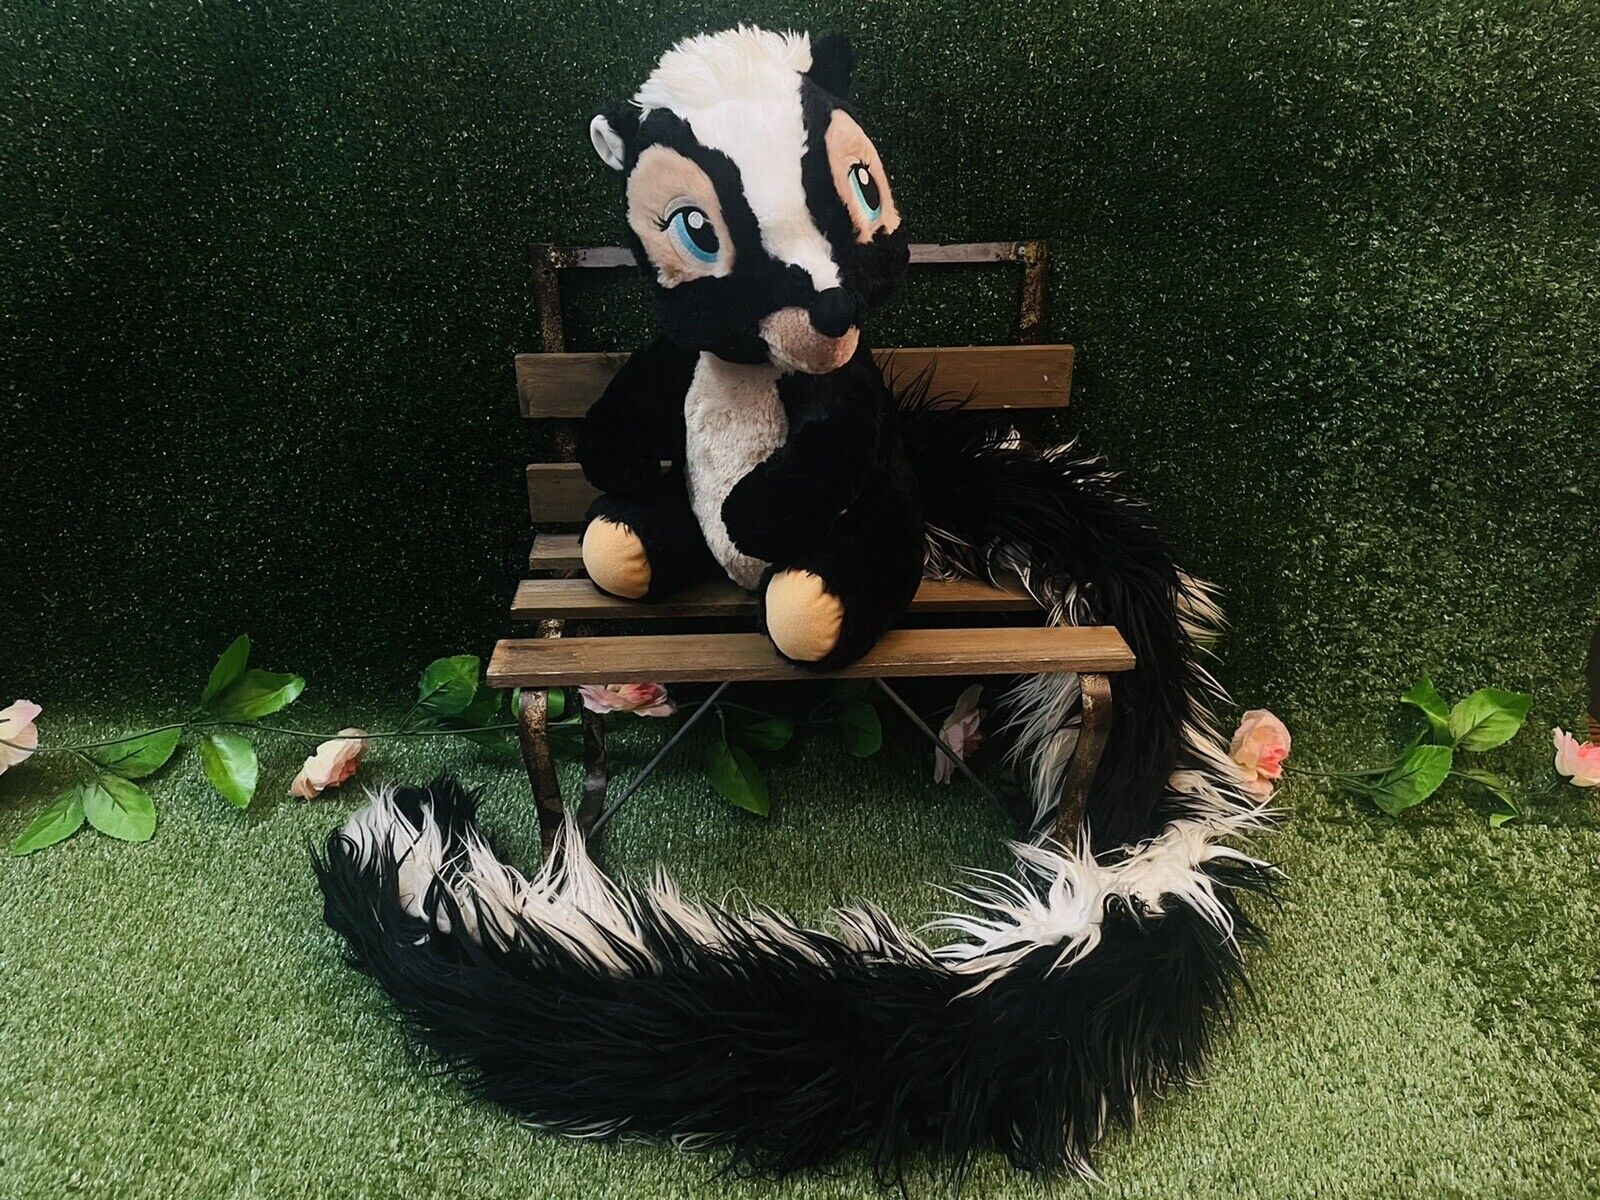 Disney Bambi Flower the Skunk 12in Tall Plush Toy with 40in Long Tail